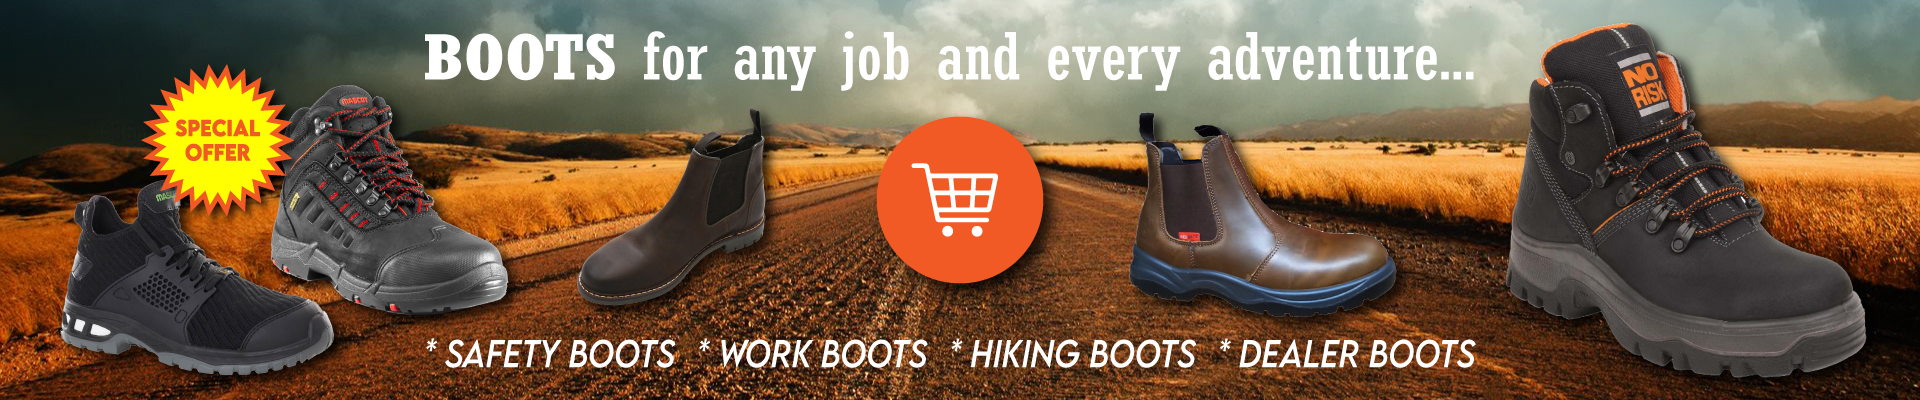 Advertisment Farm Boots for Sale at Atkins Cork